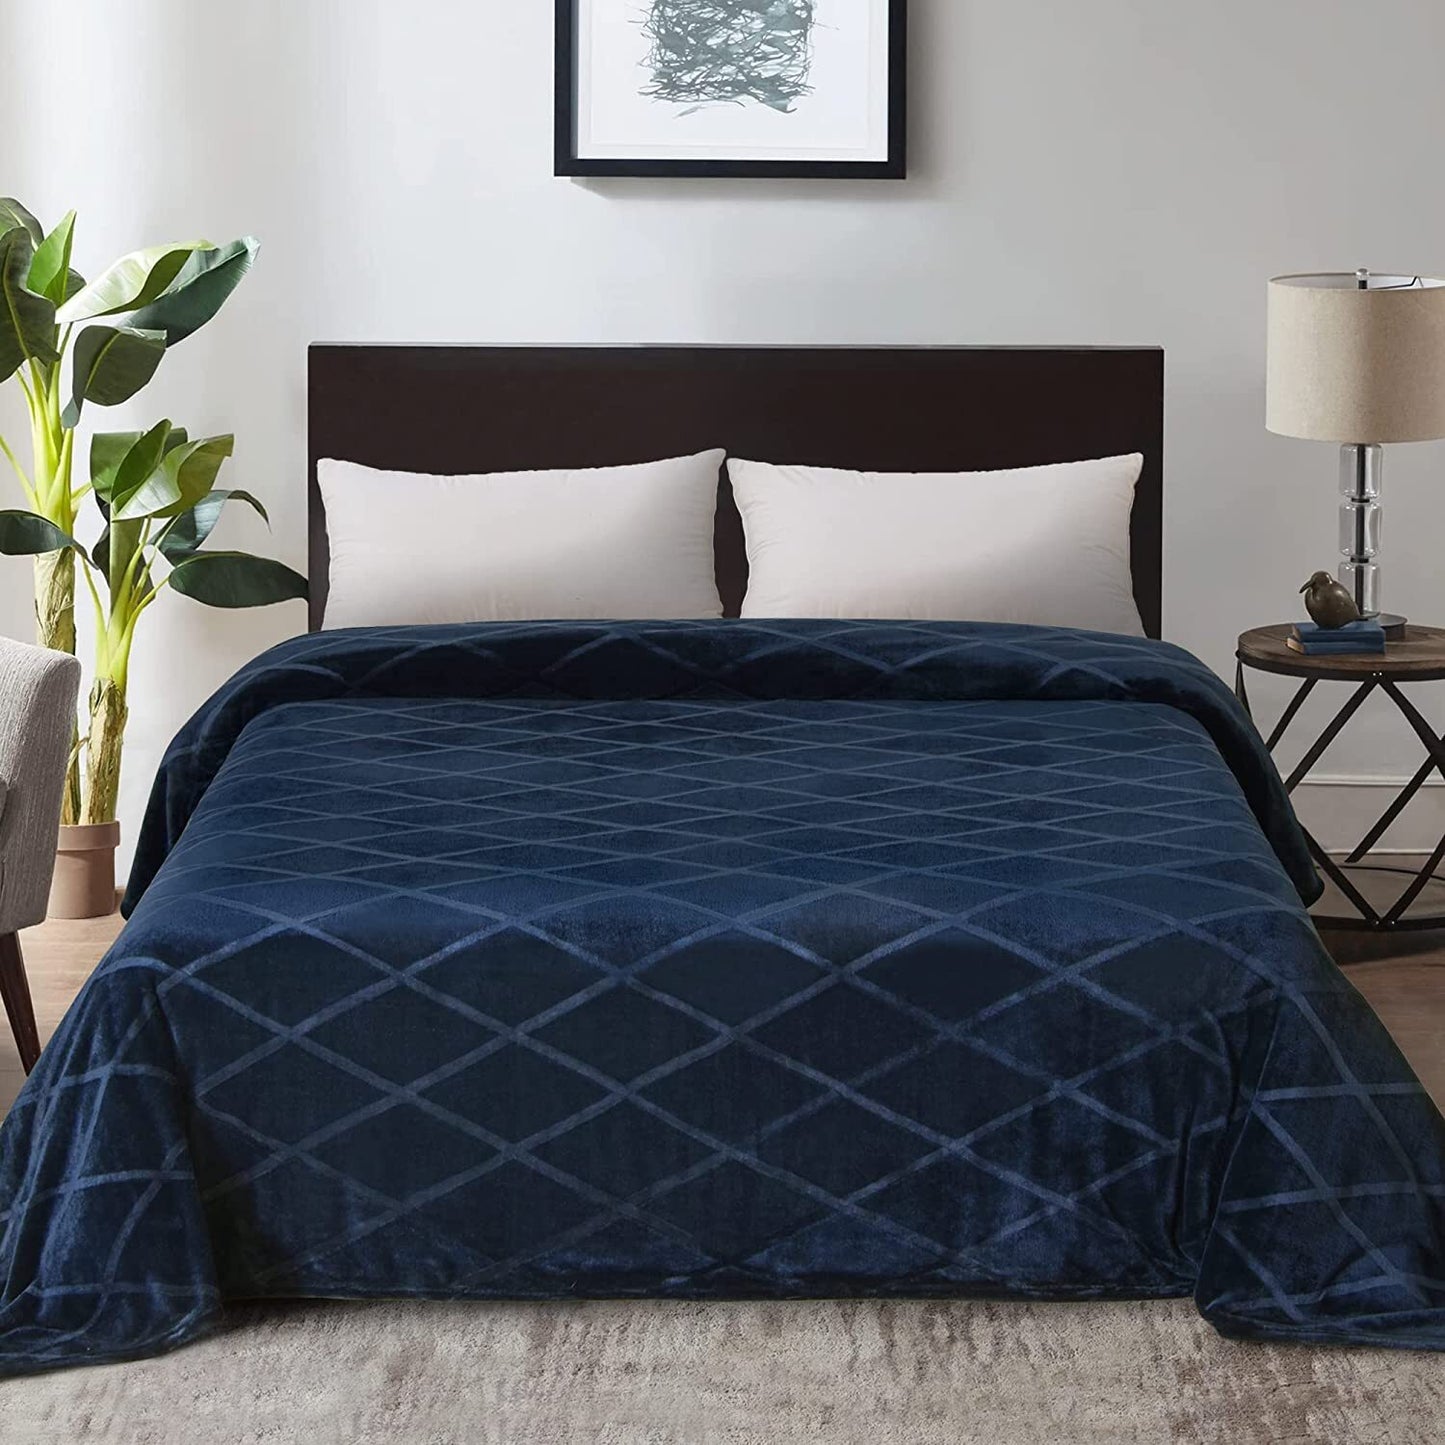 Exclusivo Mezcla King Size Flannel Fleece Blanket, 90x104 Inches Soft Diamond Geometry Pattern Velvet Plush Blanket for Bed, Cozy, Warm, Lightweight and Decorative Navy Blue Blanket